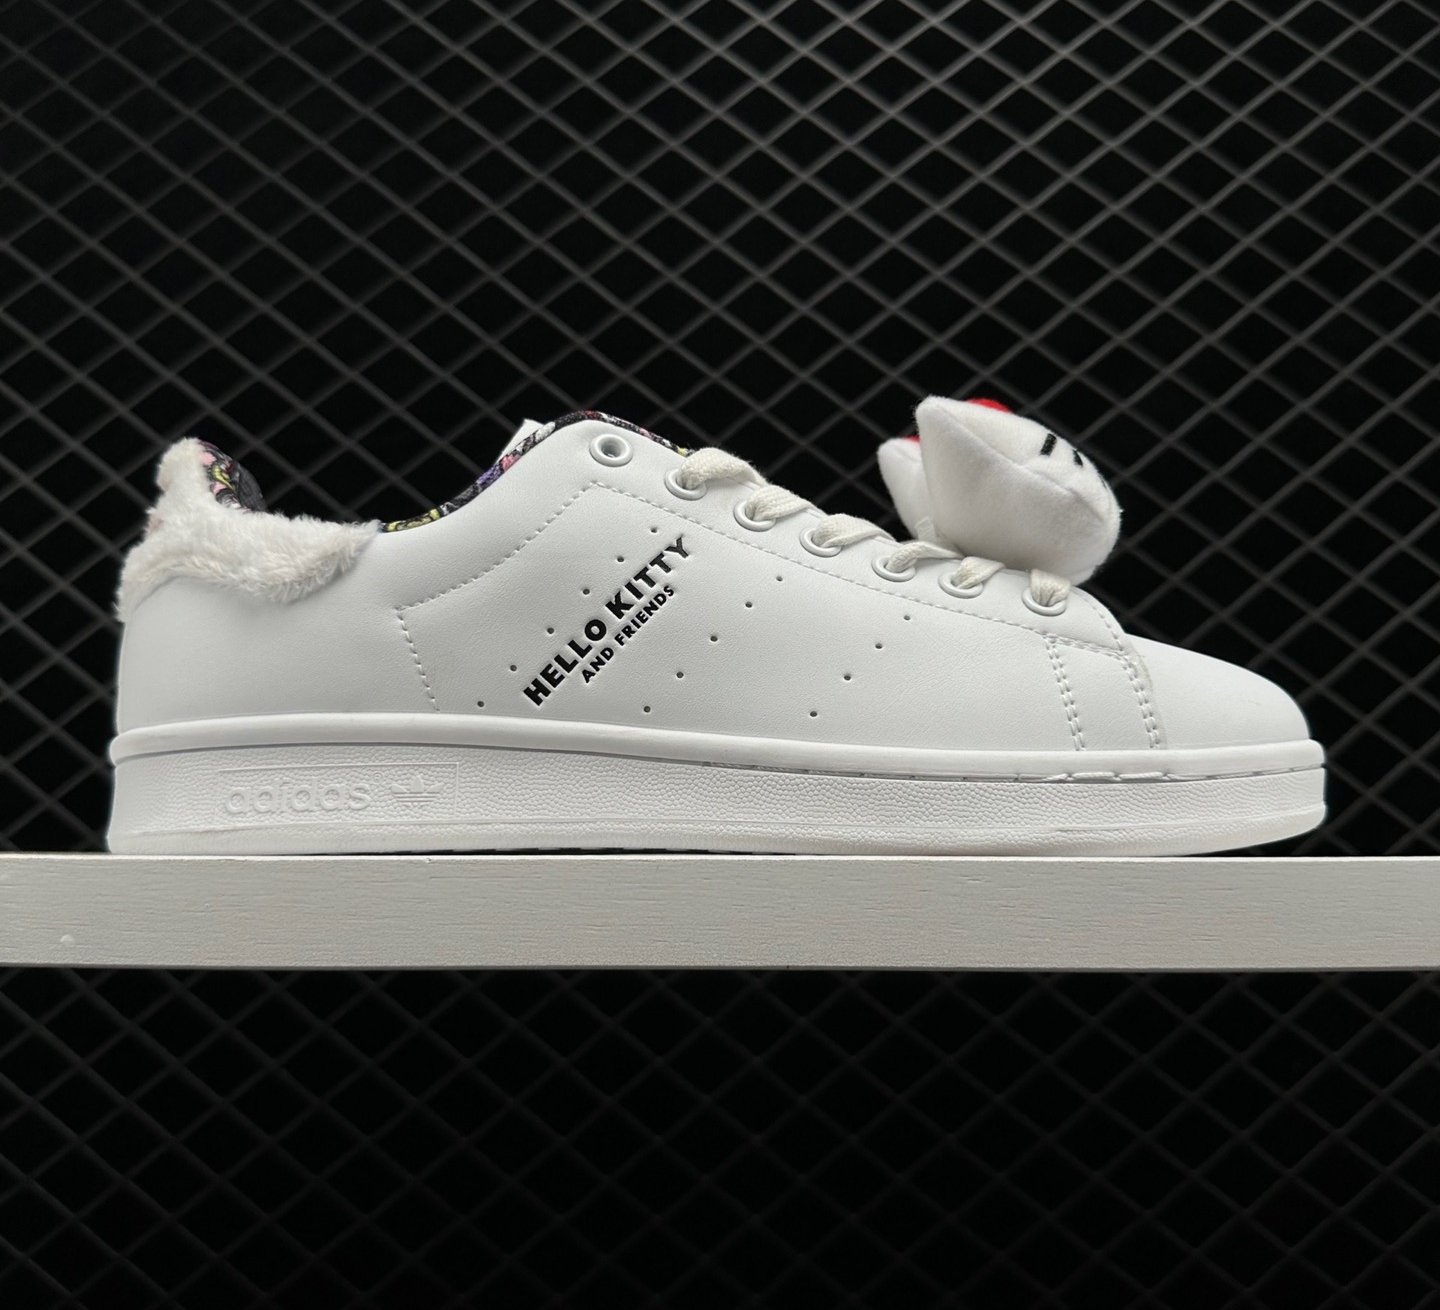 Adidas Originals Stan Smith X Hello Kitty 'Cloud White': Limited Edition Collaboration!